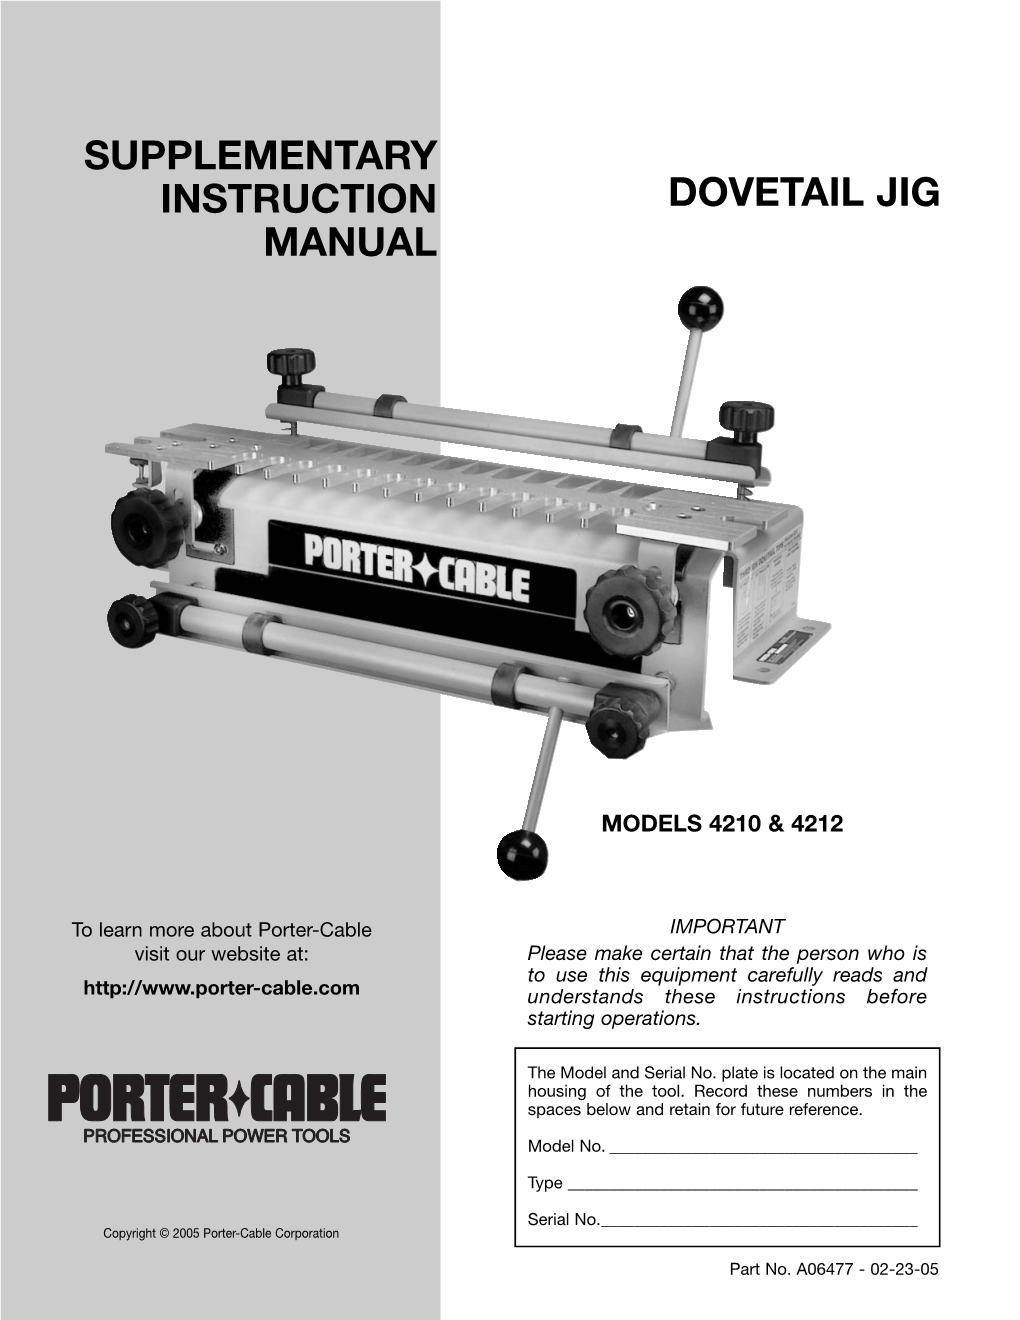 Dovetail Jig Supplementary Instruction Manual